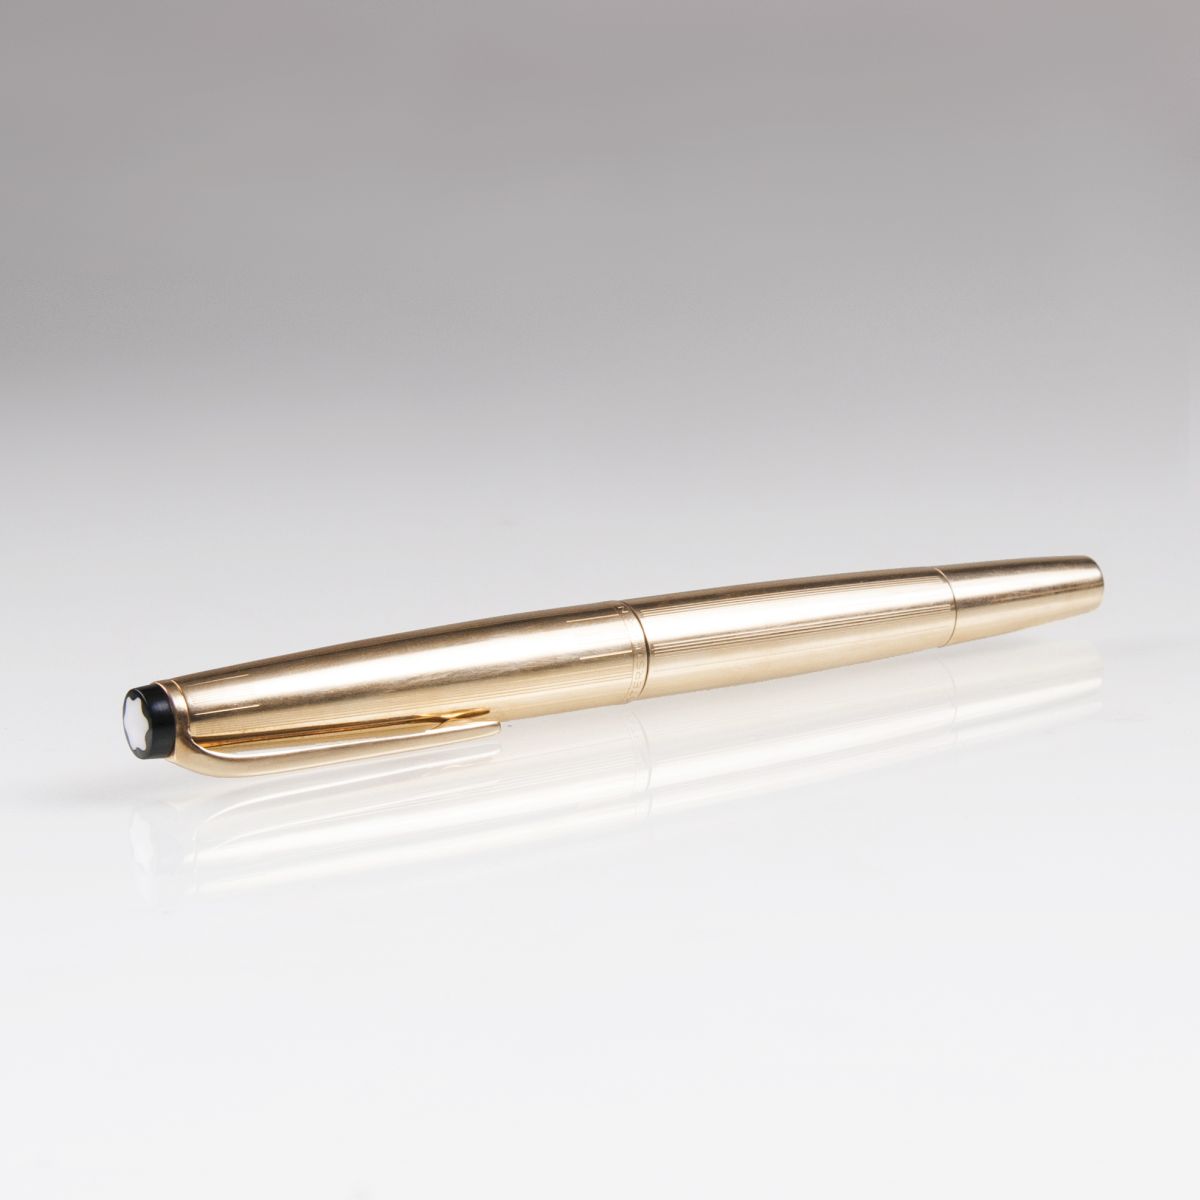 A Vintage fountain pen by Montblanc